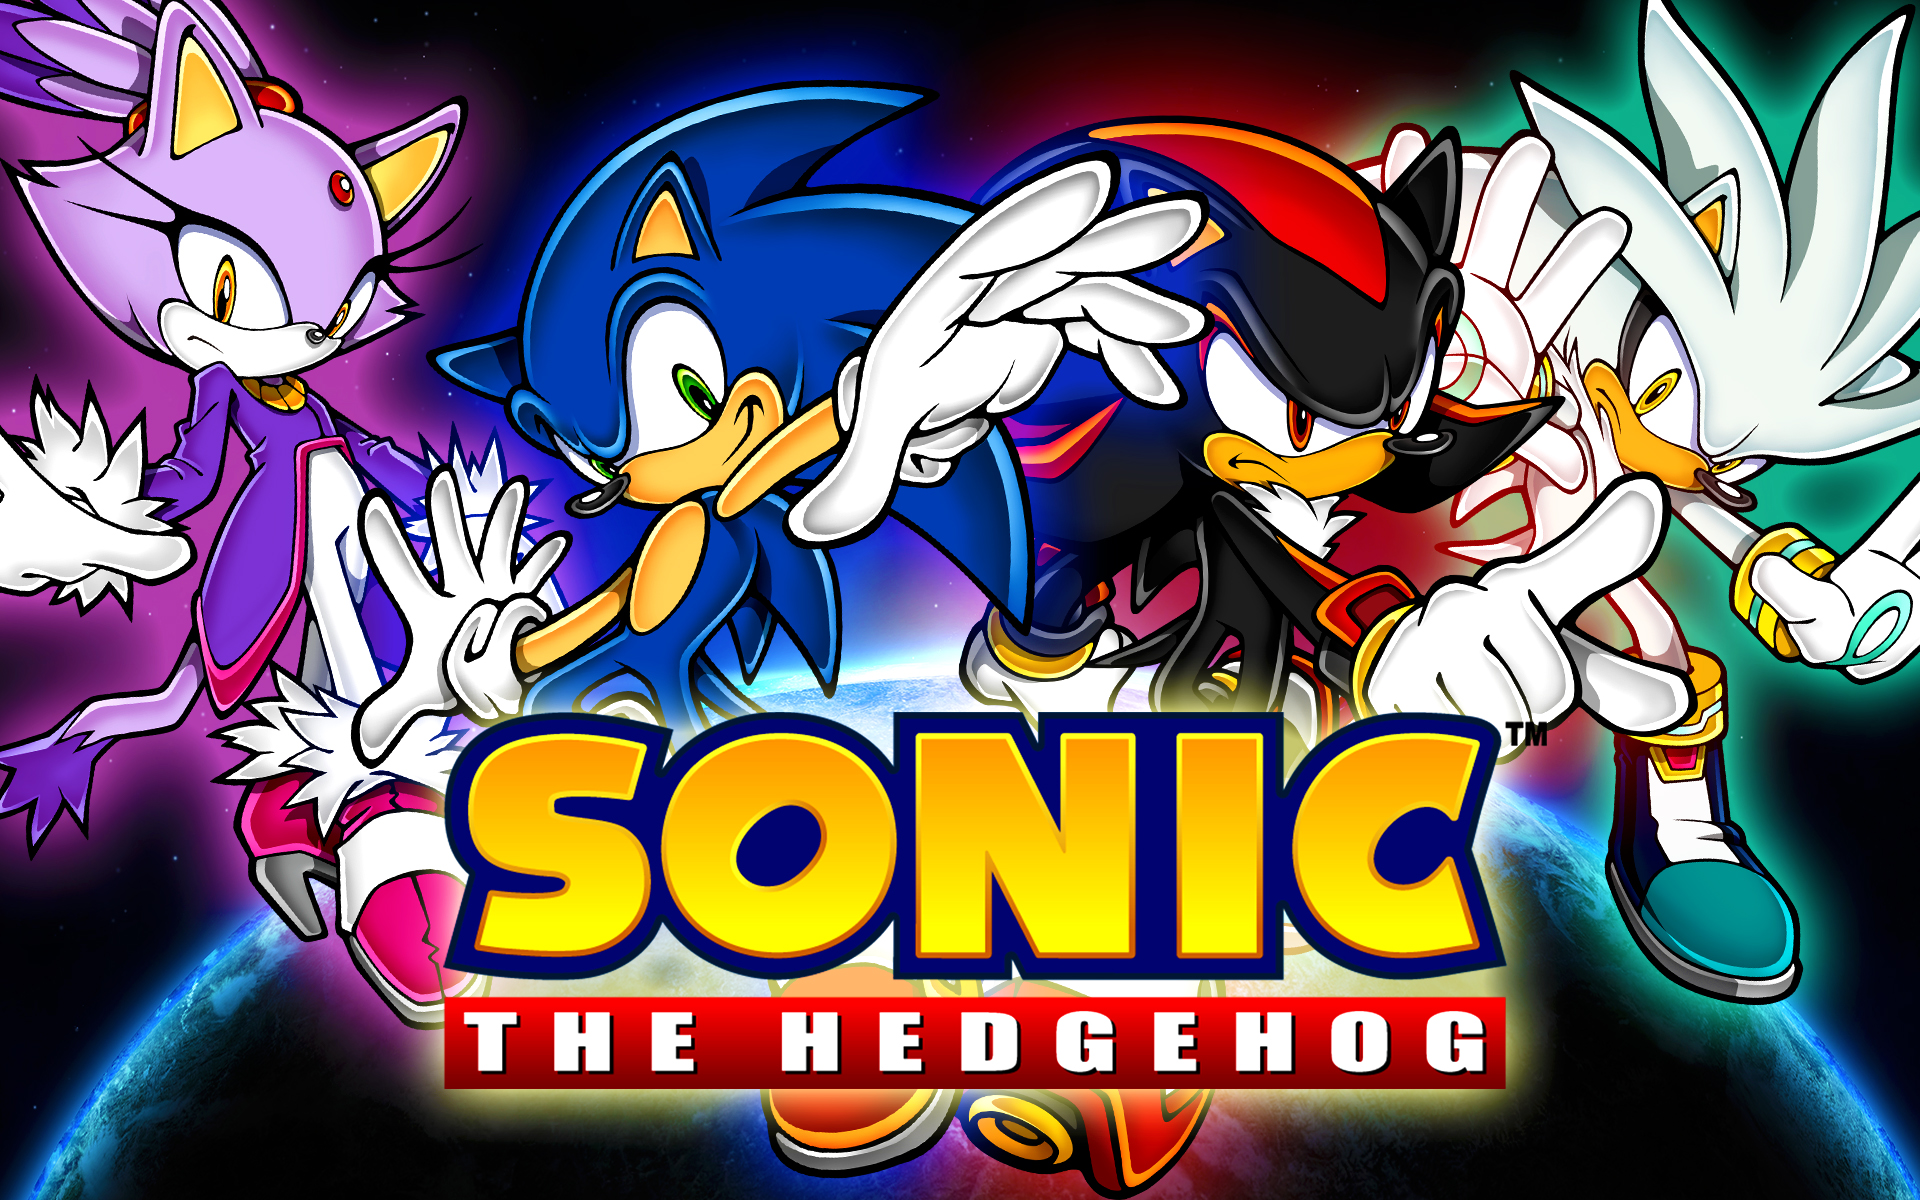 Sonic Shadow And Silver The Hedgehog Wallpaper Sonic shadow silver